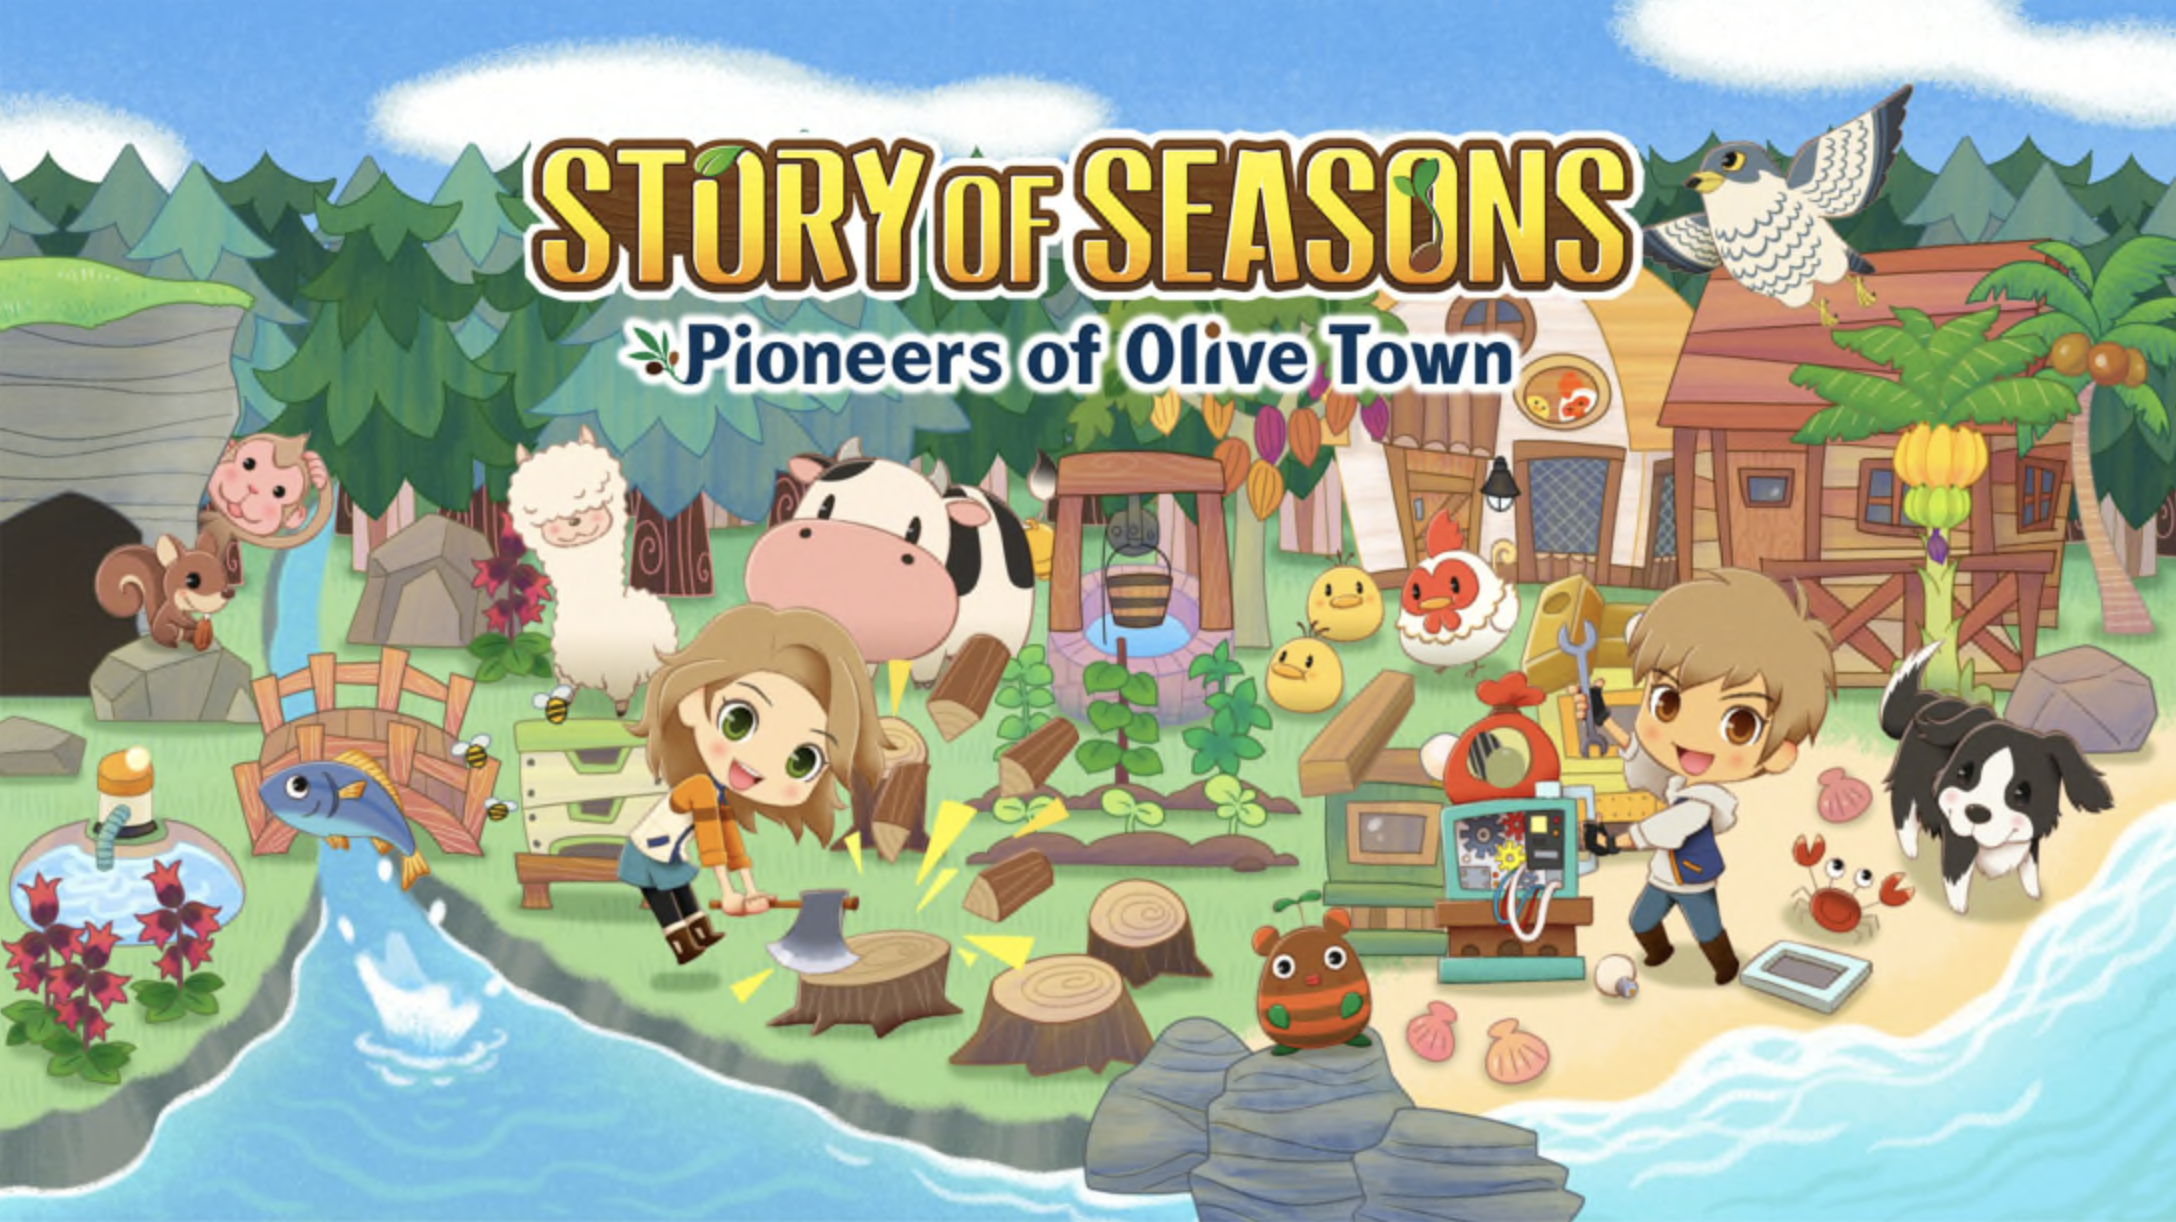 How to Fill Up Heart Meters Quickly in Story of Seasons: Pioneers of Olive Town